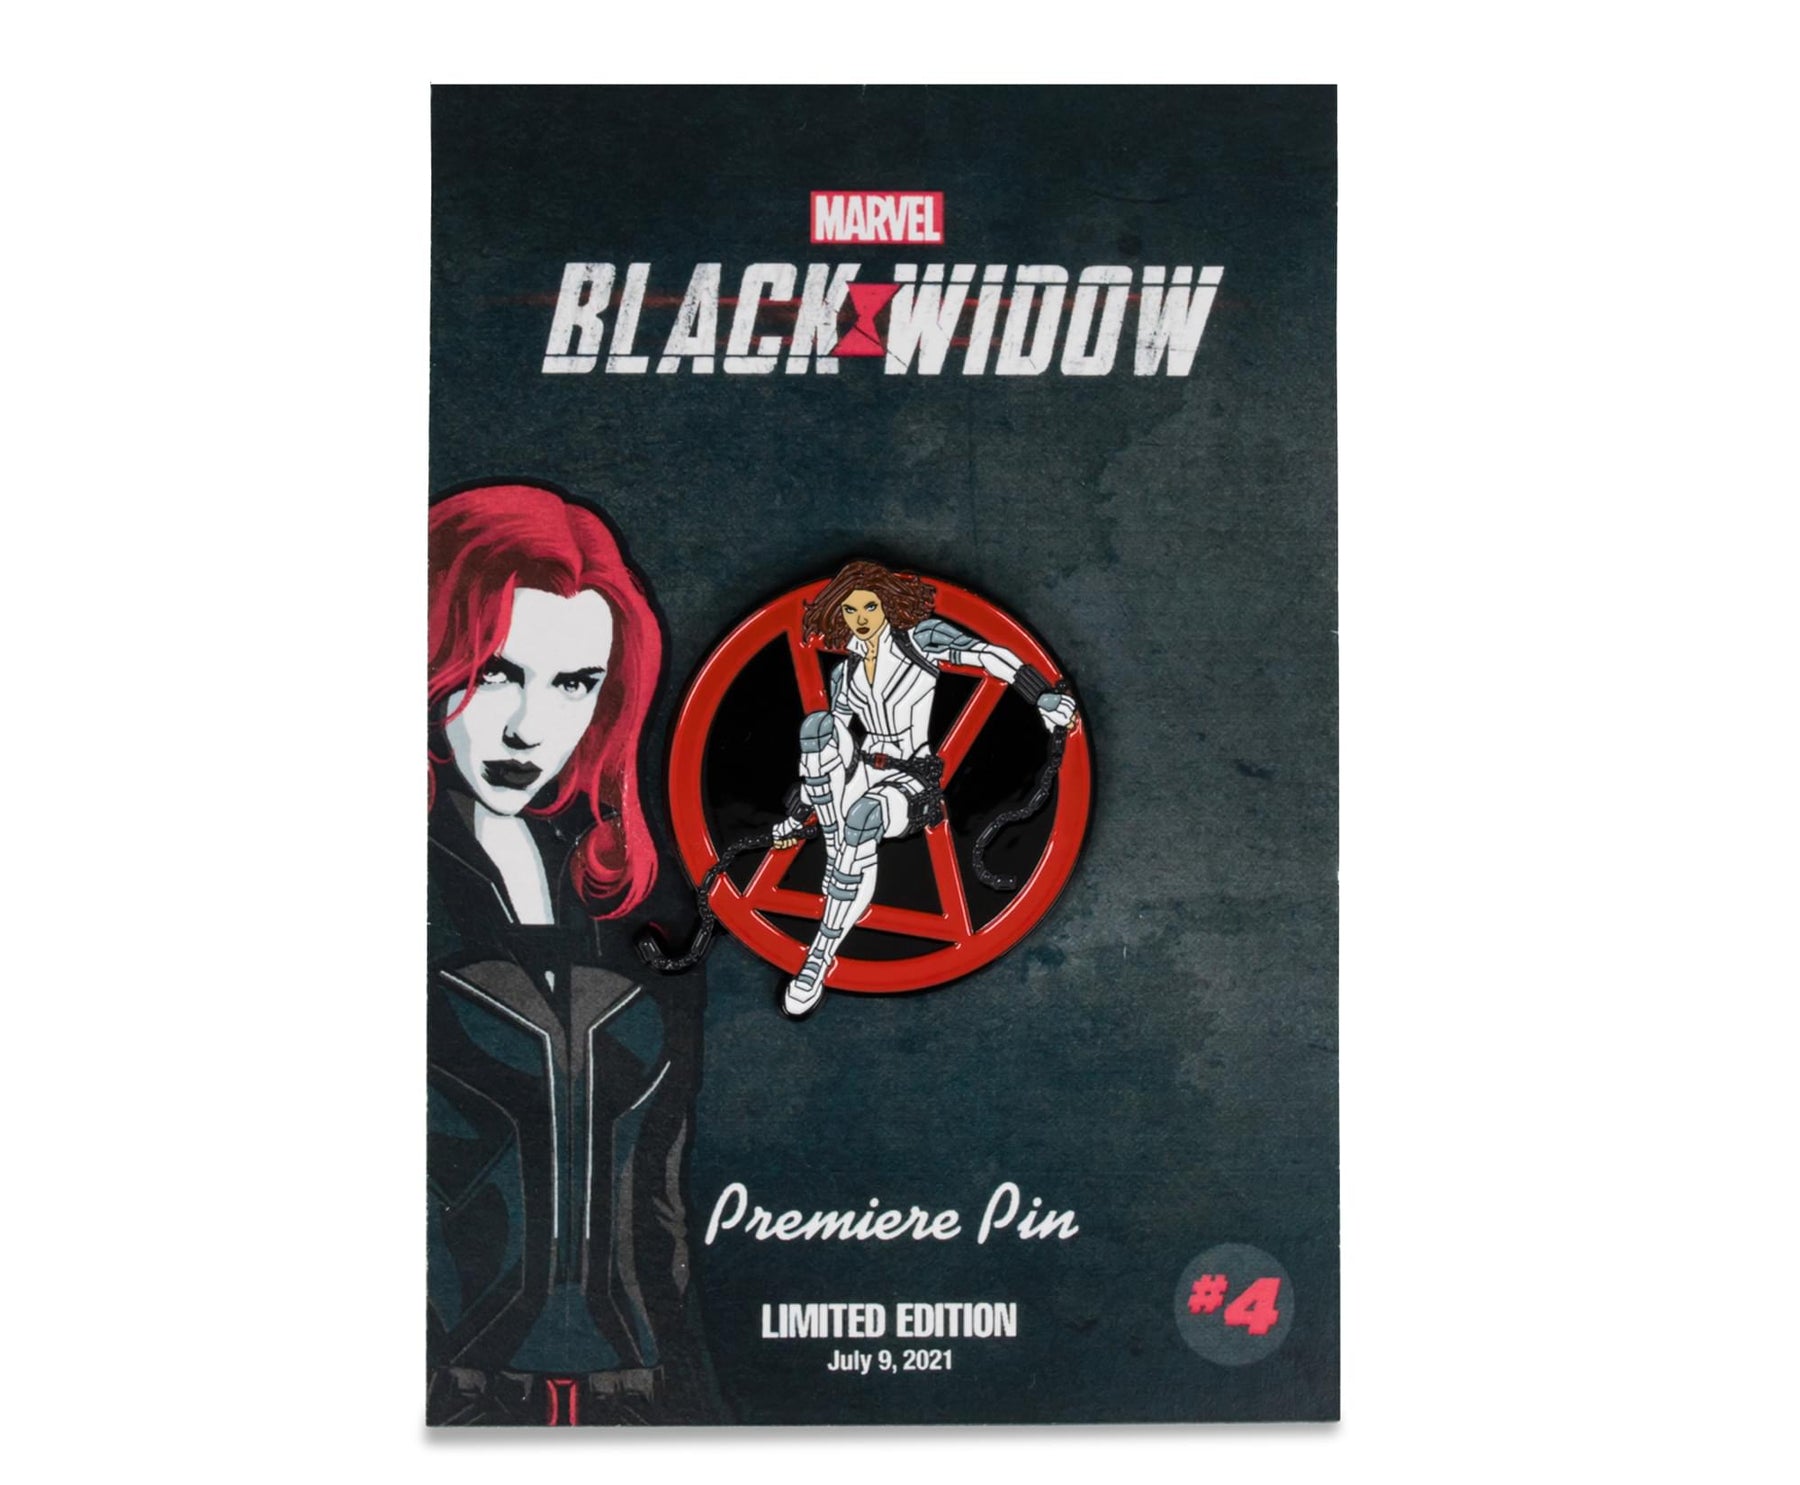 Marvel Black Widow Limited Edition Premiere Pin | Toynk Exclusive